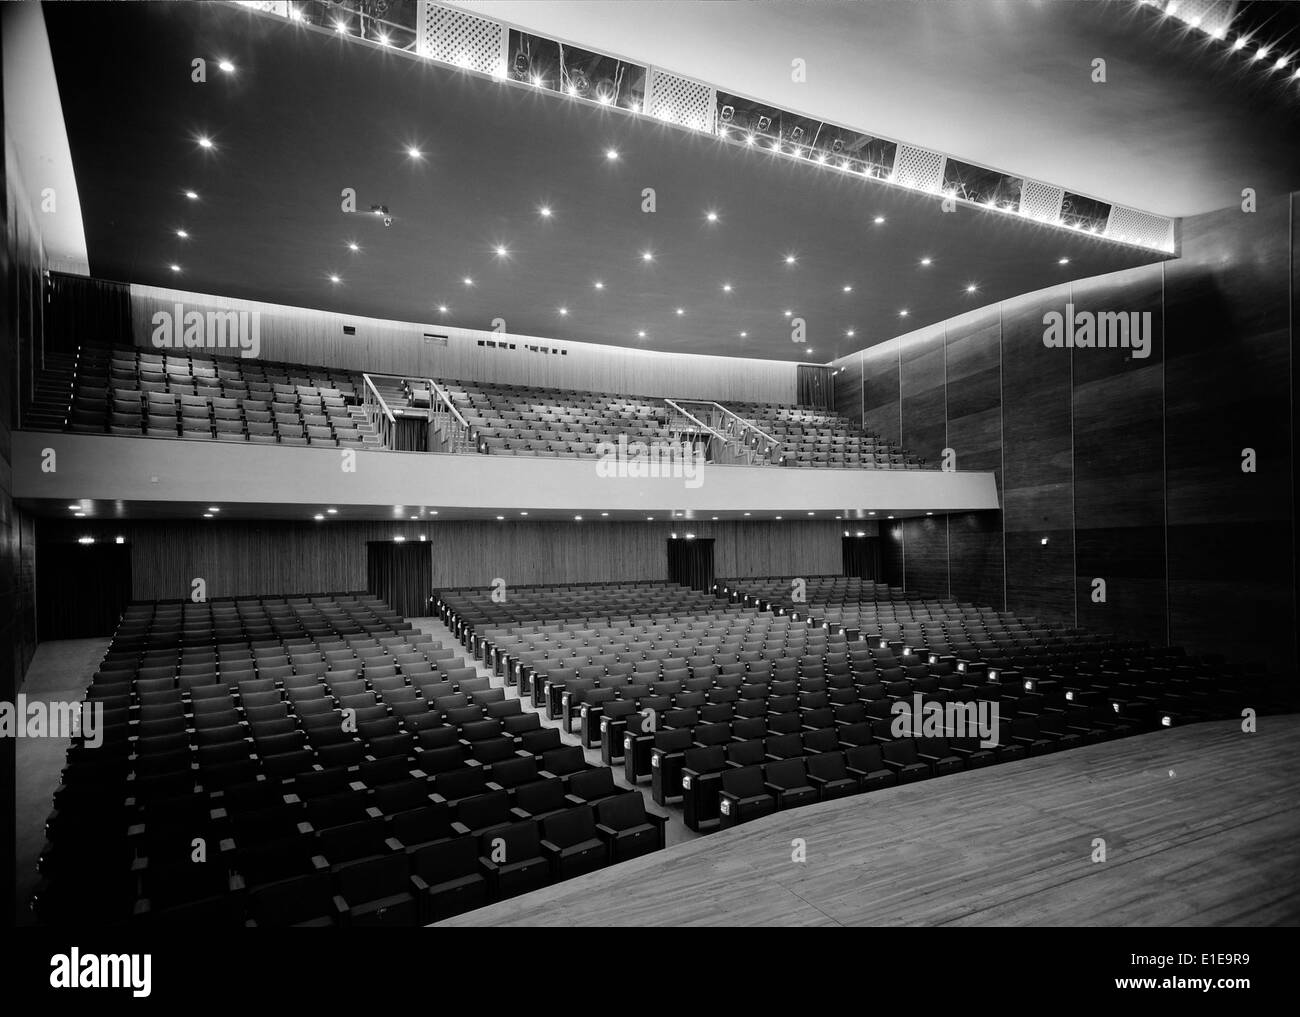 Teatro Gil Vicente, Coimbra, Portugal Stock Photo, Royalty Free Image ...